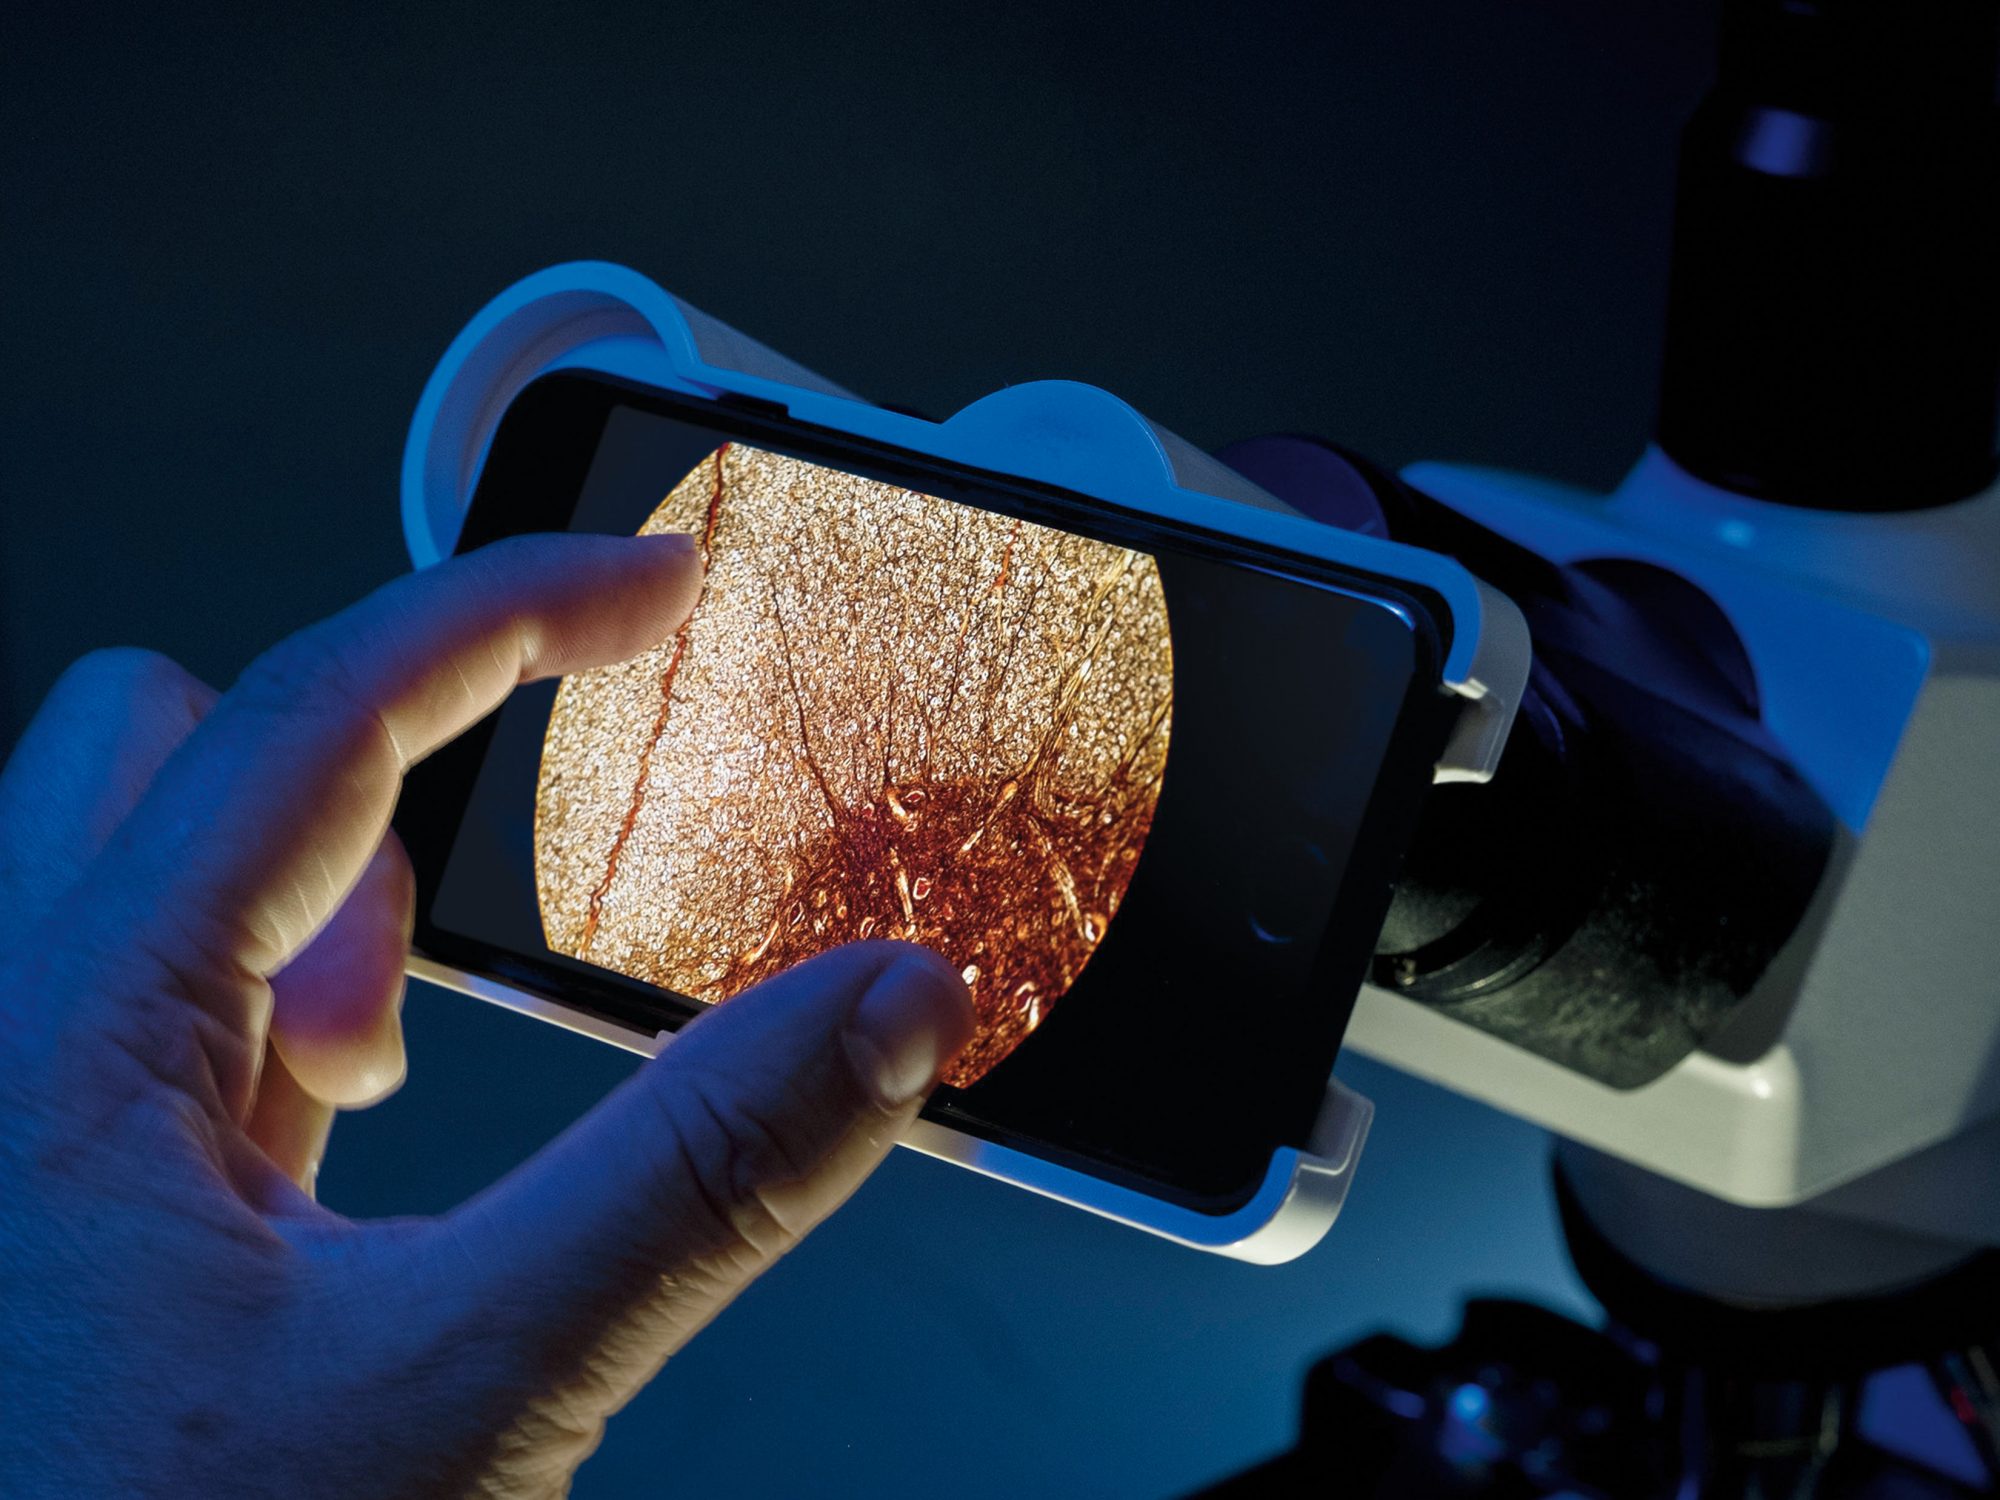 Live-cell imaging in your pocket